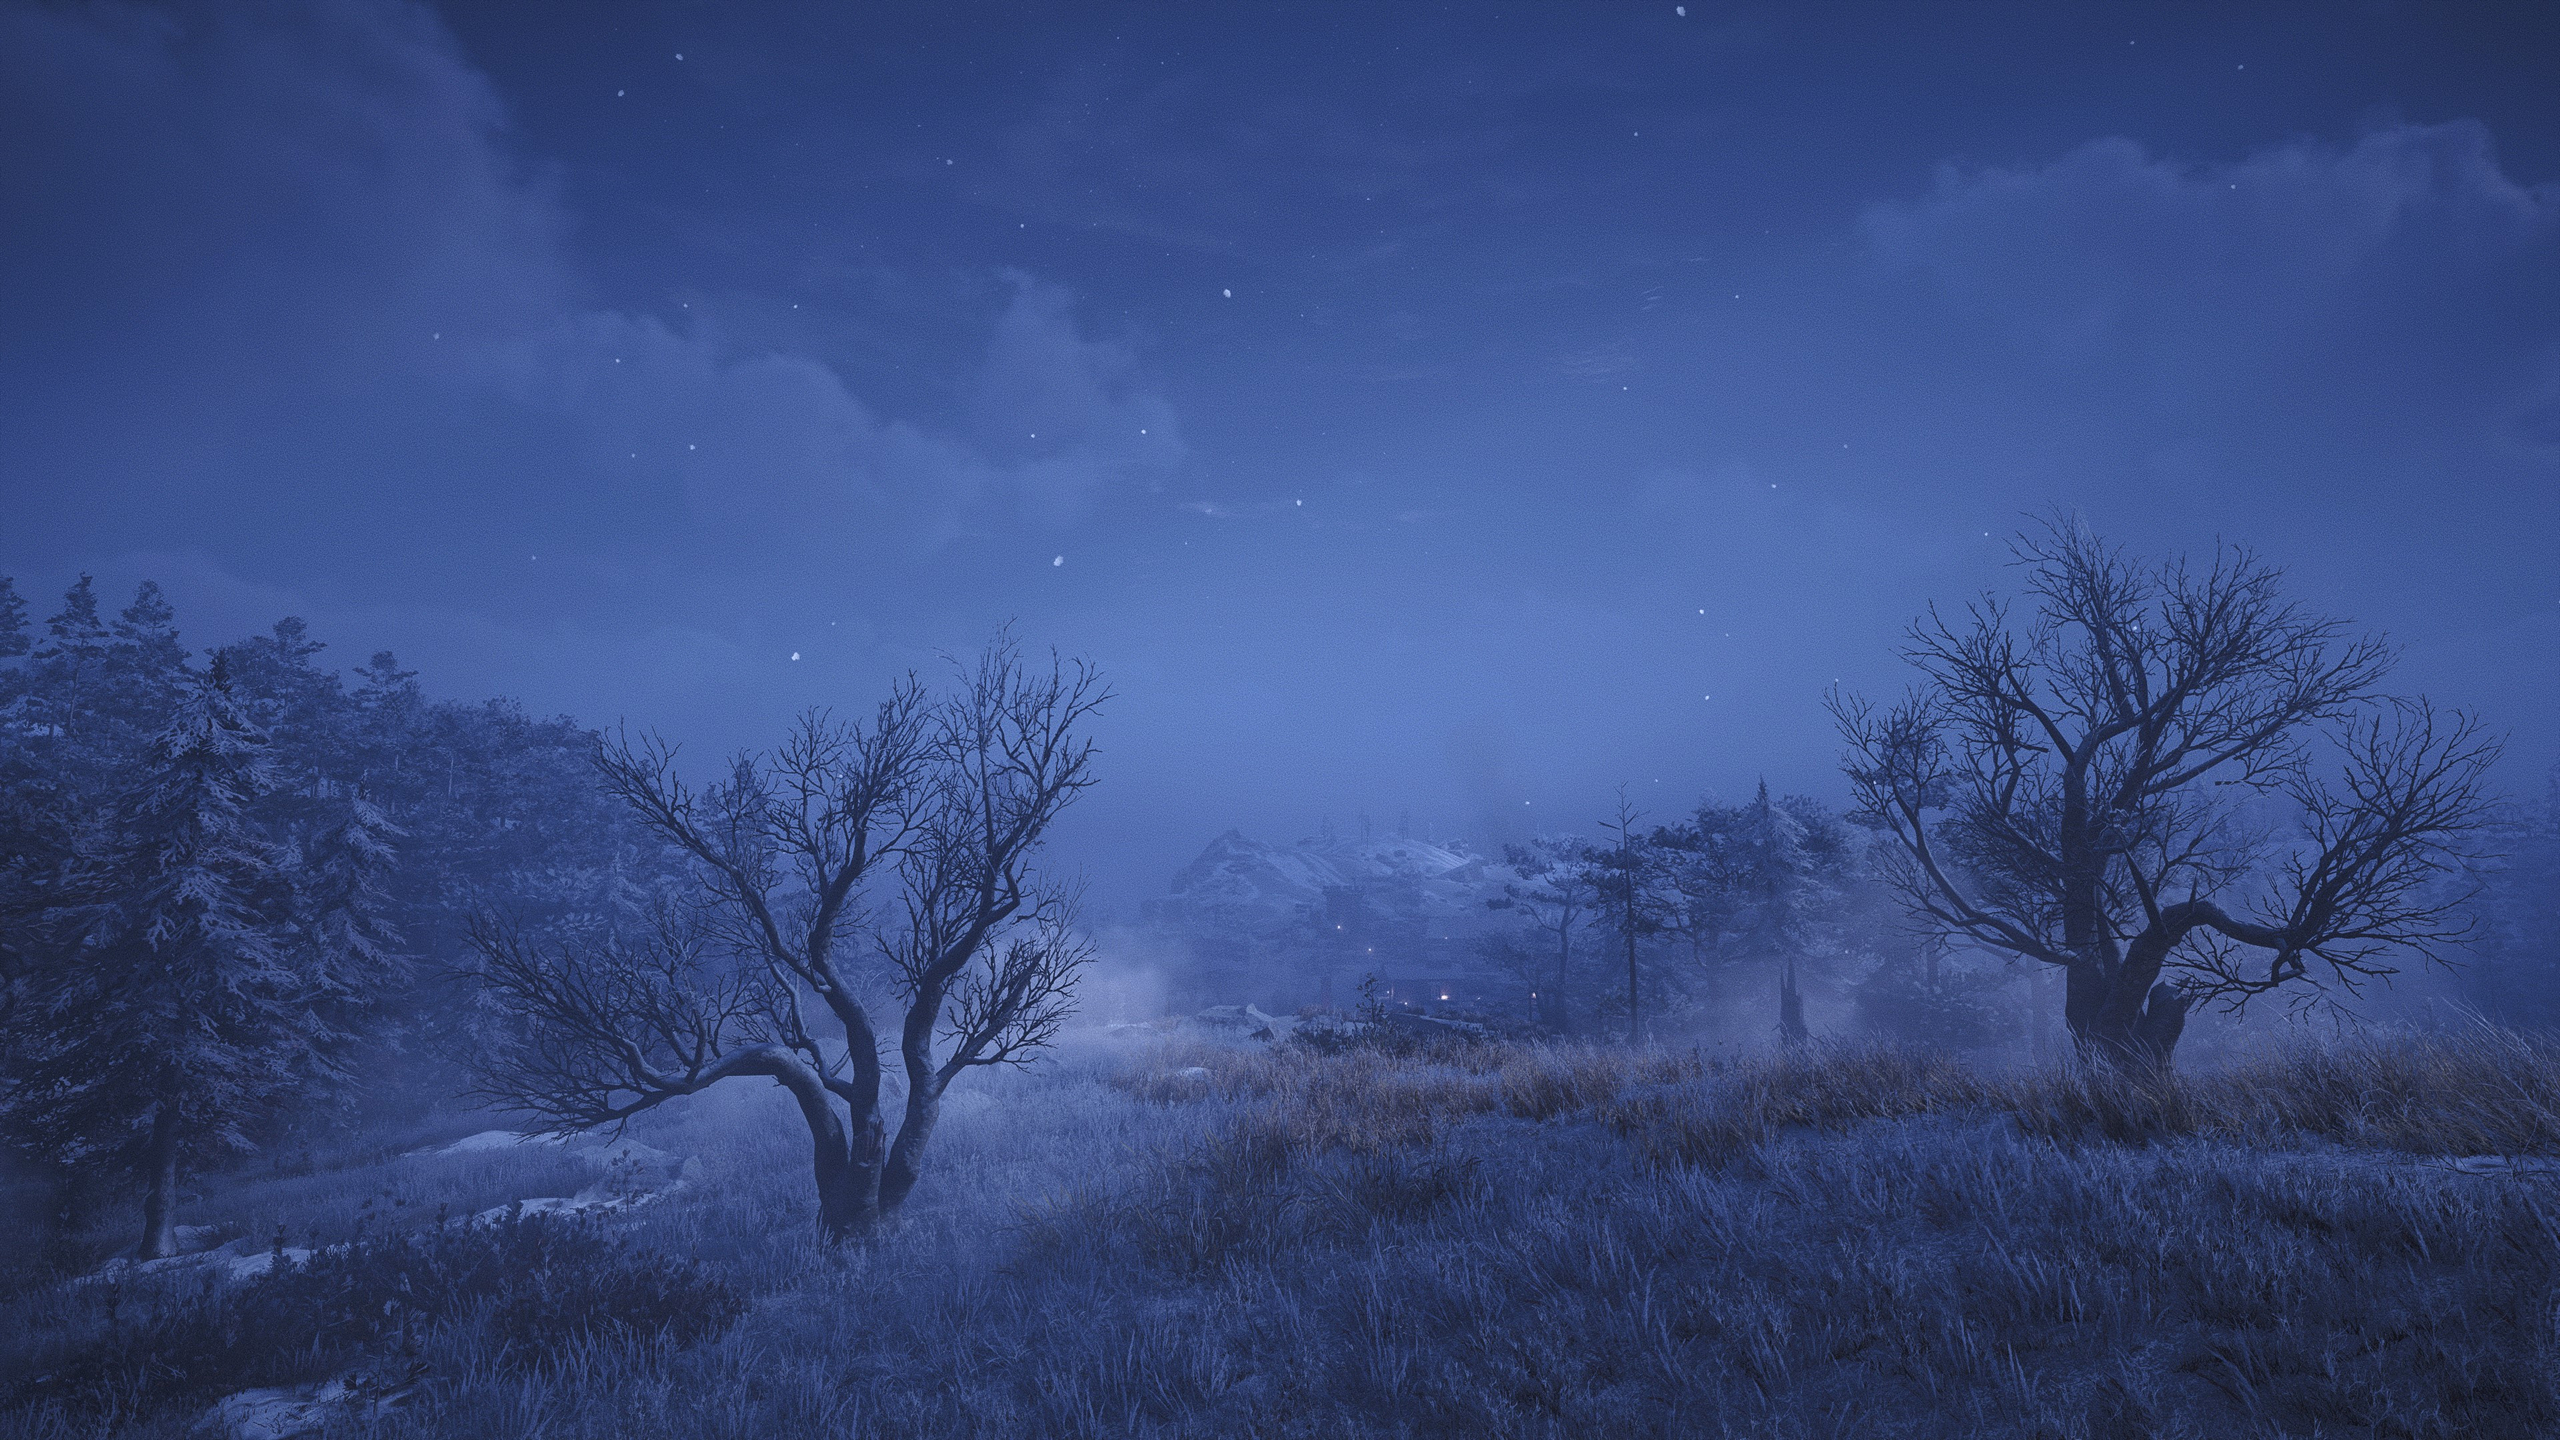 Assassins Creed Valhalla Reshade HDR Depth Of Field Video Games Trees Nature Sky Night Stars 2560x1440